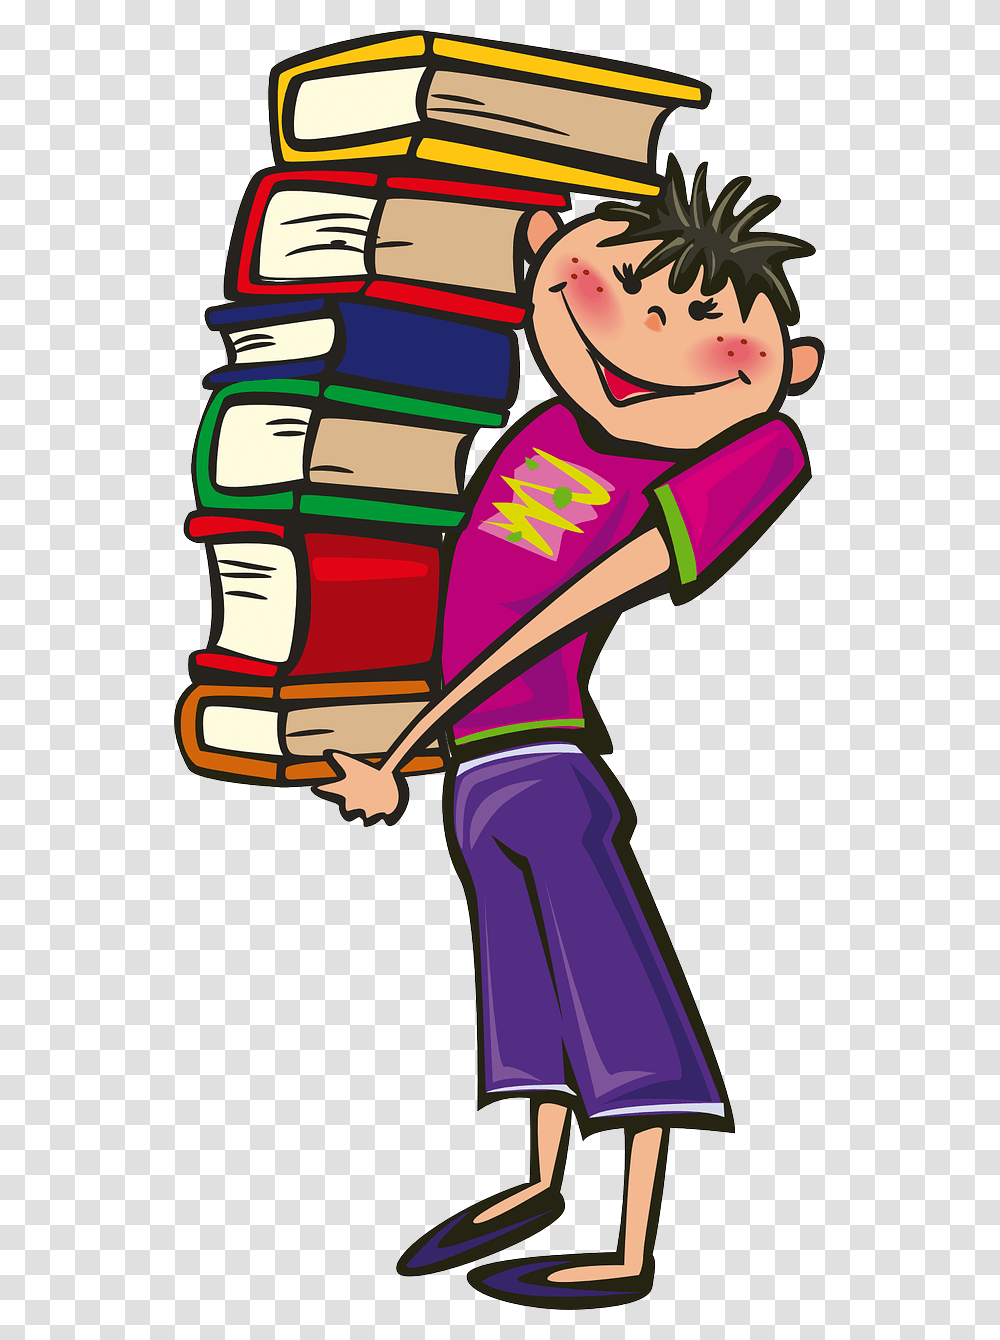 Student With Books Clipart, Apparel, Costume, Performer Transparent Png